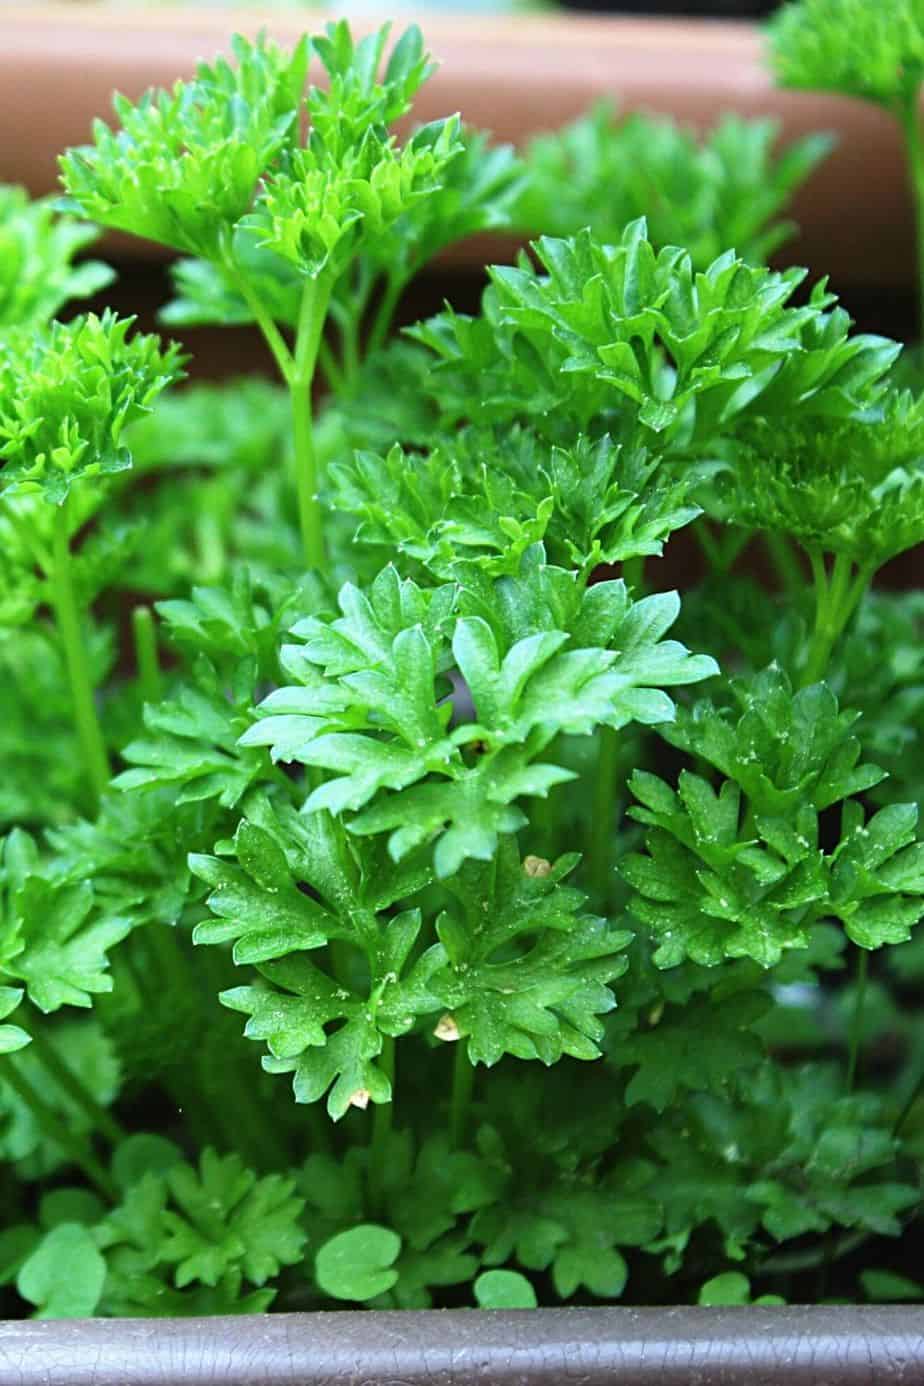 Parsley is another popular herb that you can grow on your south-facing balcony